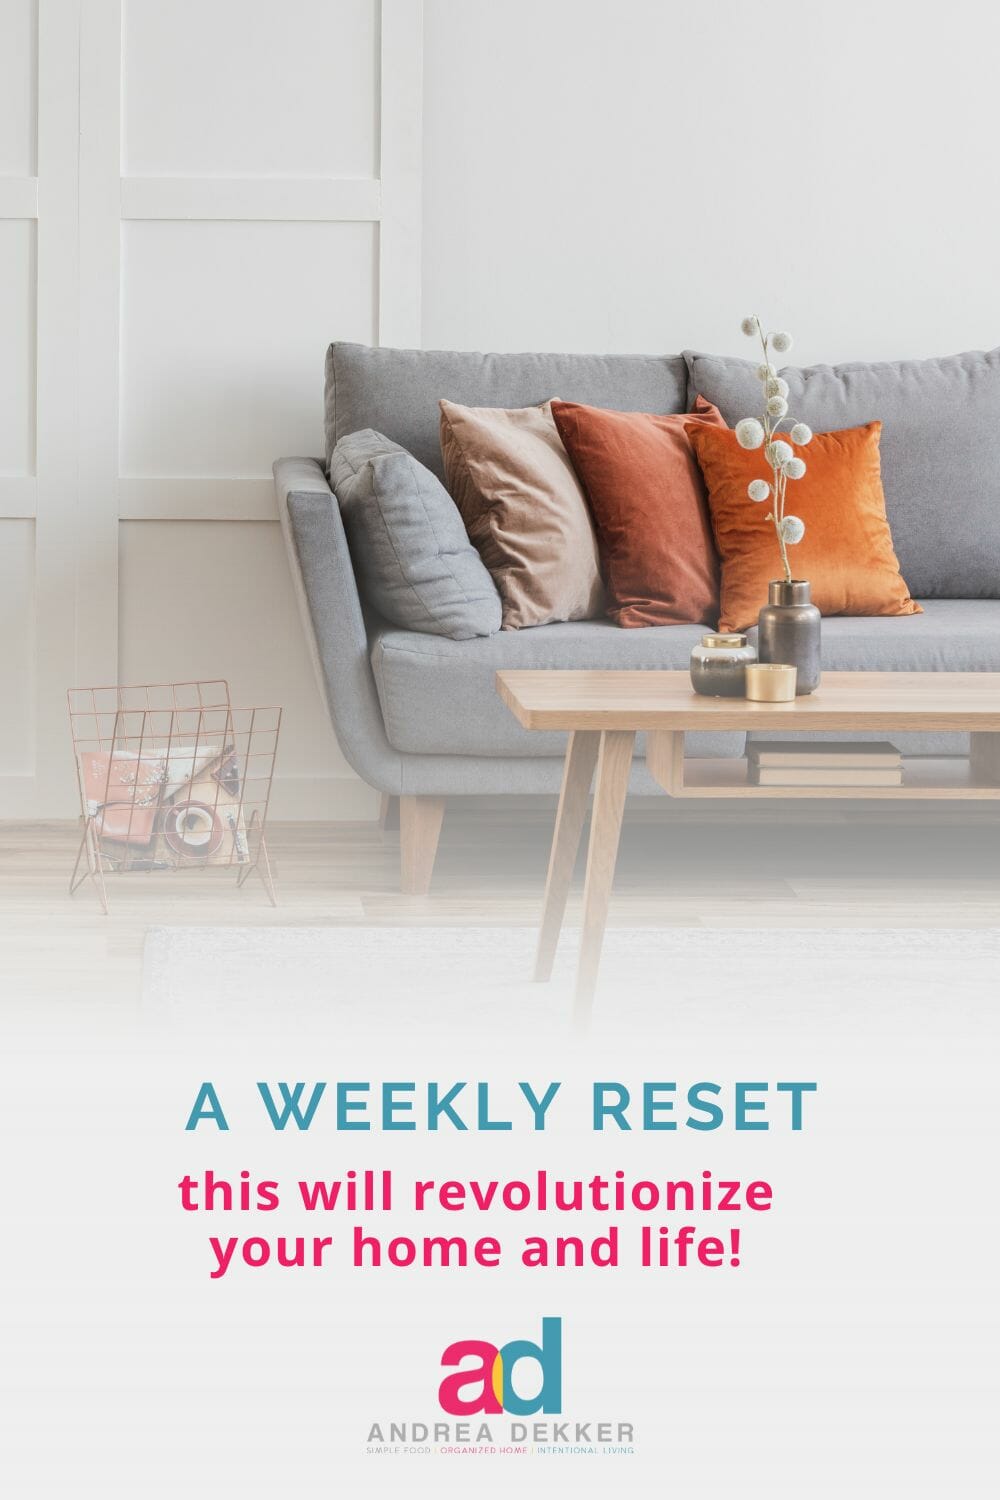 If I shared ONE thing you can do every week that has the potential to revolutionize your home and life... would you do it? Then let me share the concept of a Weekly Reset! via @andreadekker